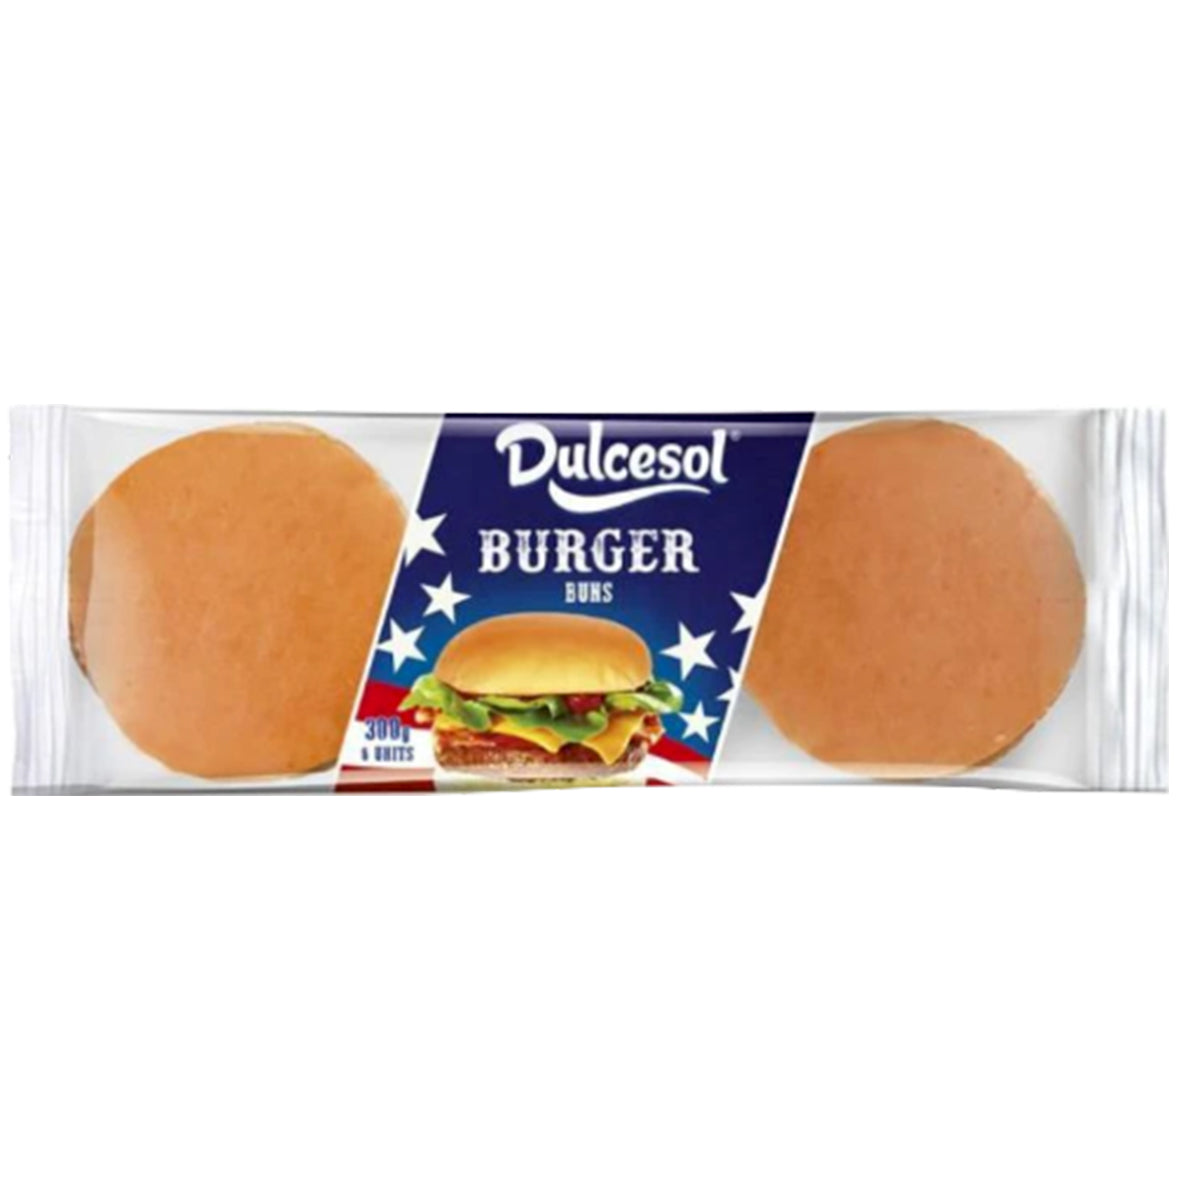 A package of Dulcesol - Burger Buns - 6 Pack on a white background.